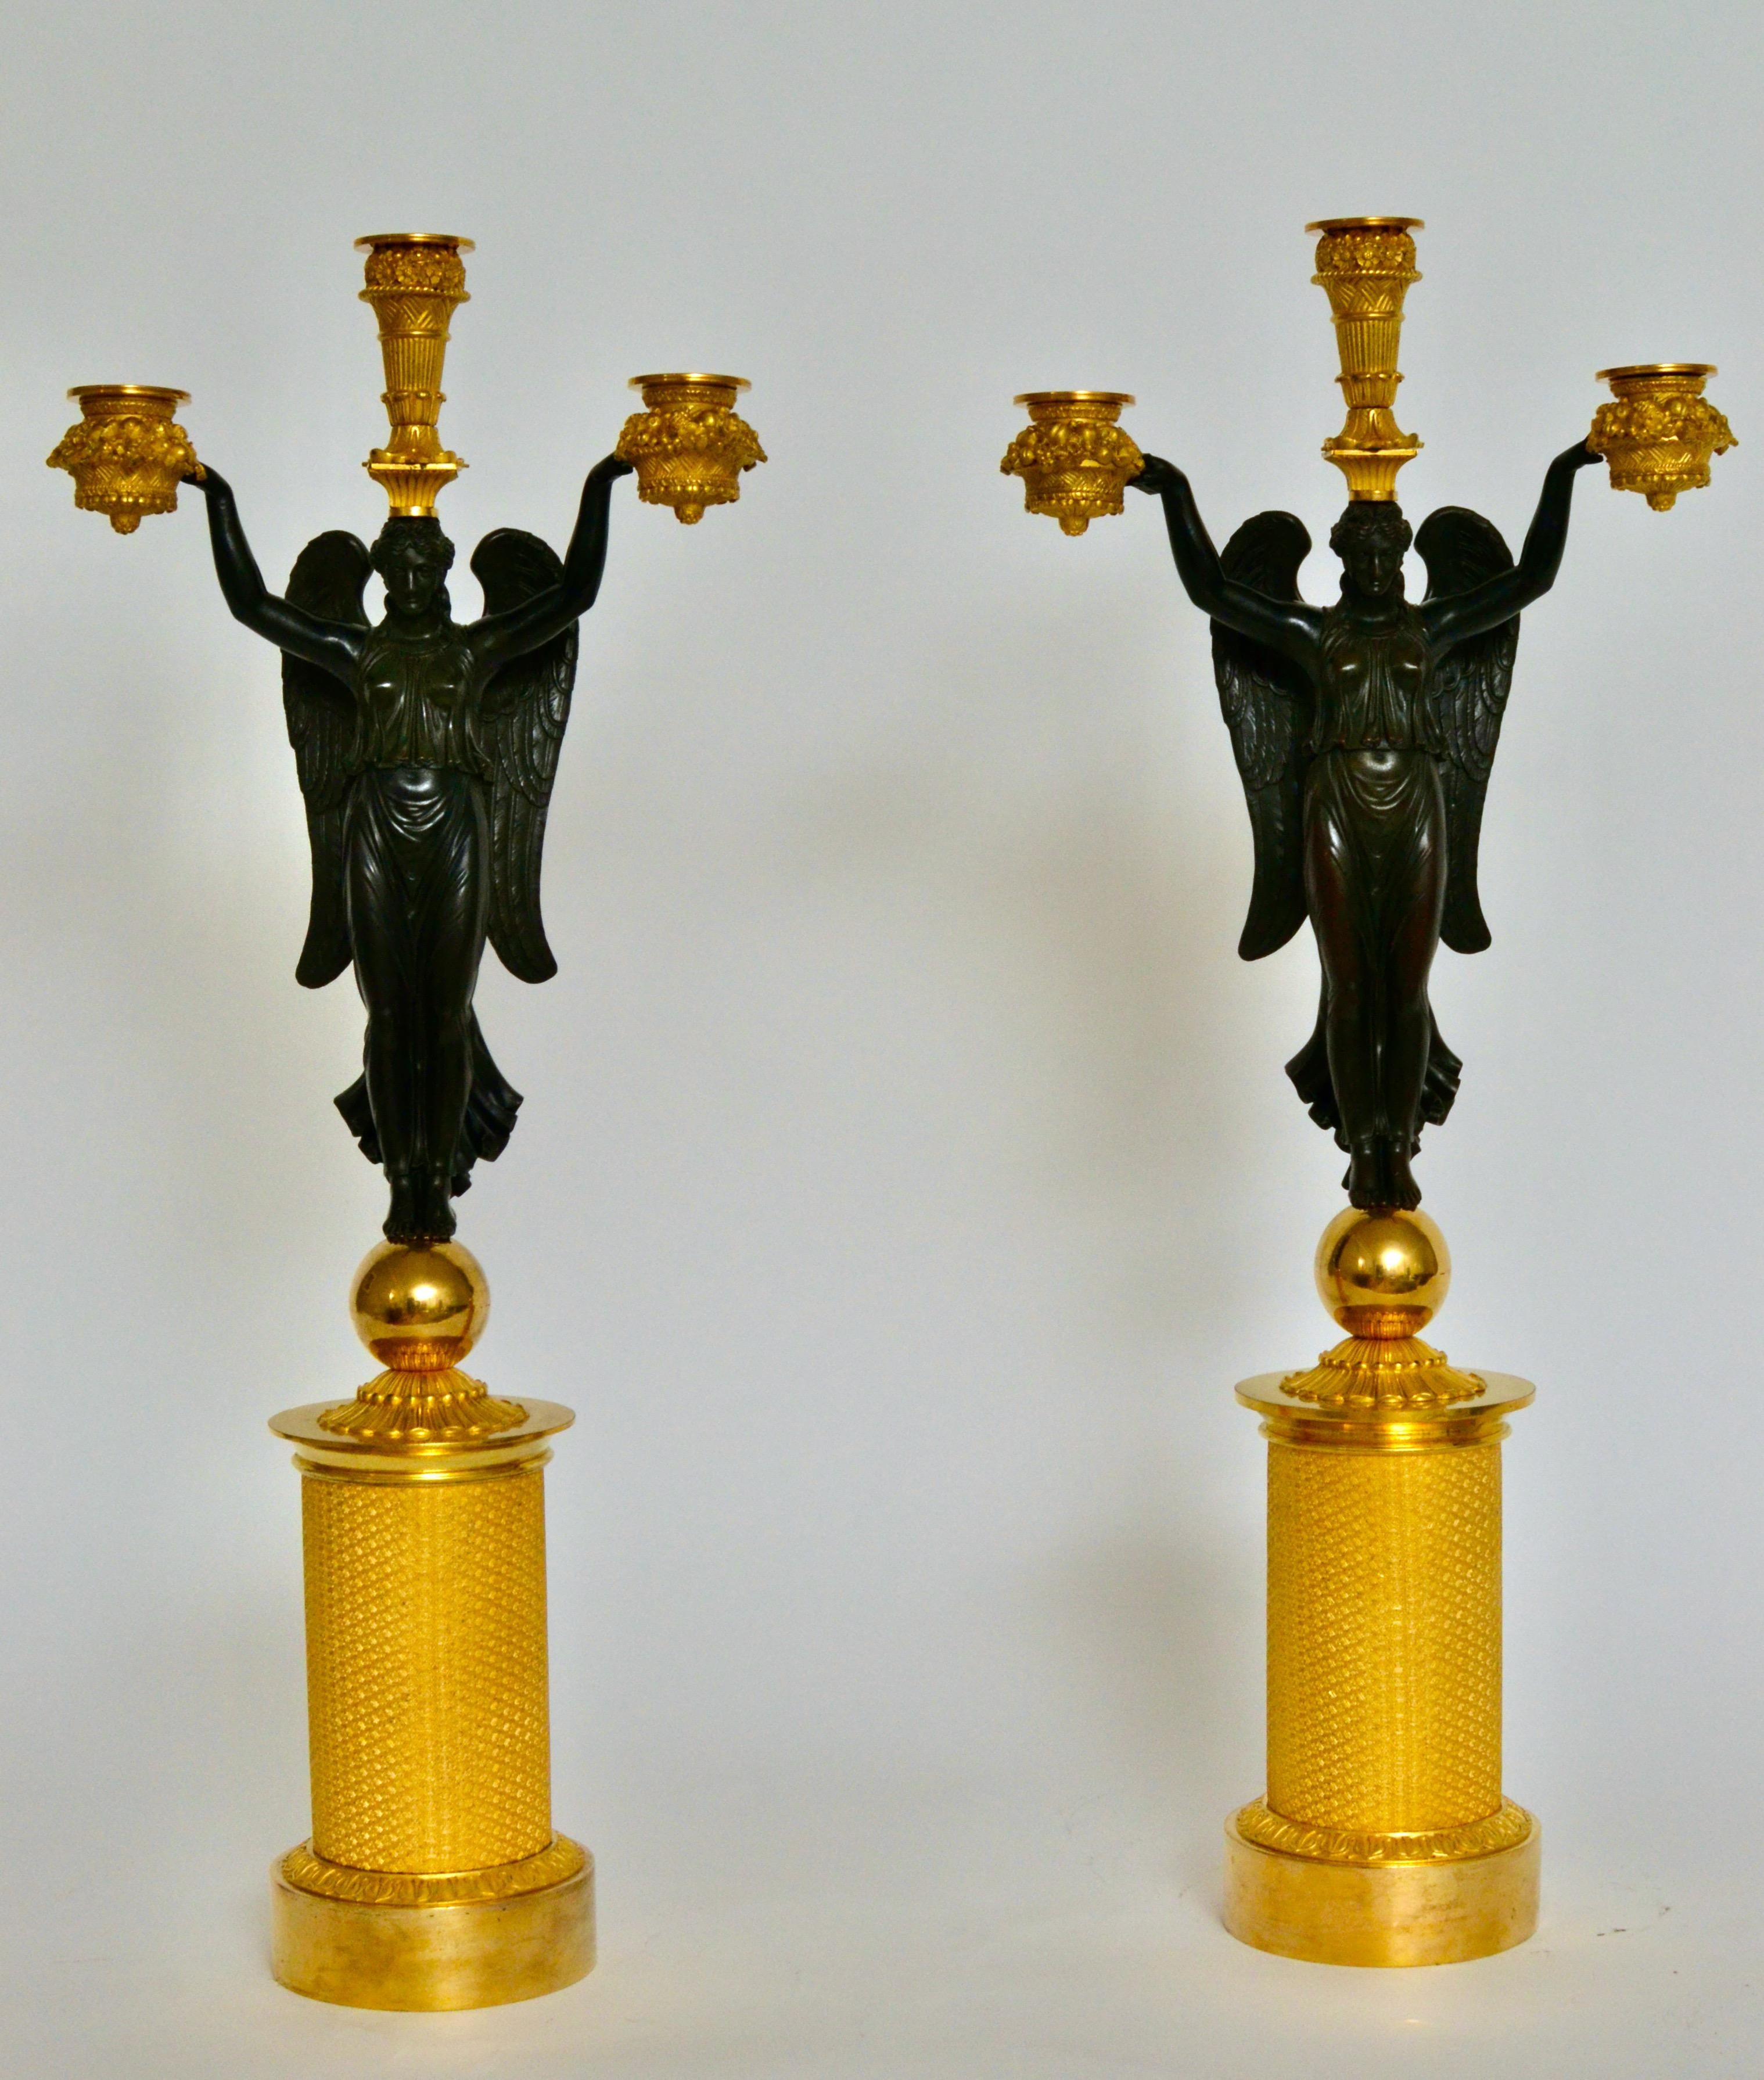 This rare pair of Empire period candelabra was designed by Pierre-Philippe Thomire and and most probably executed by Claude François Rabiat. There are known examples signed by Rabiat. They each have three lights, carried by winged Victories. These